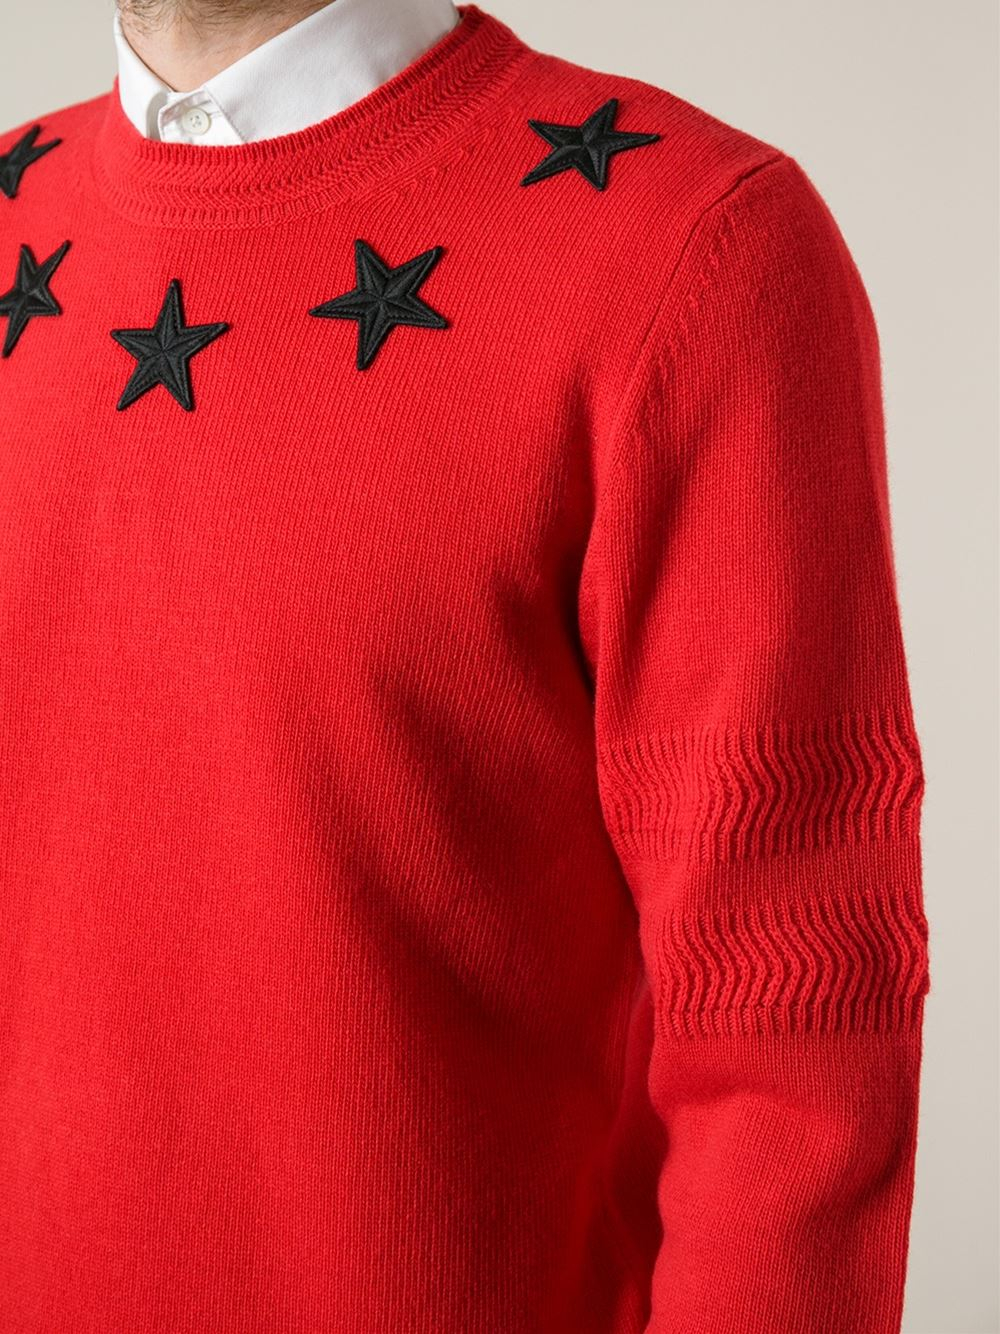 Givenchy Star Sweater in Red for Men - Lyst